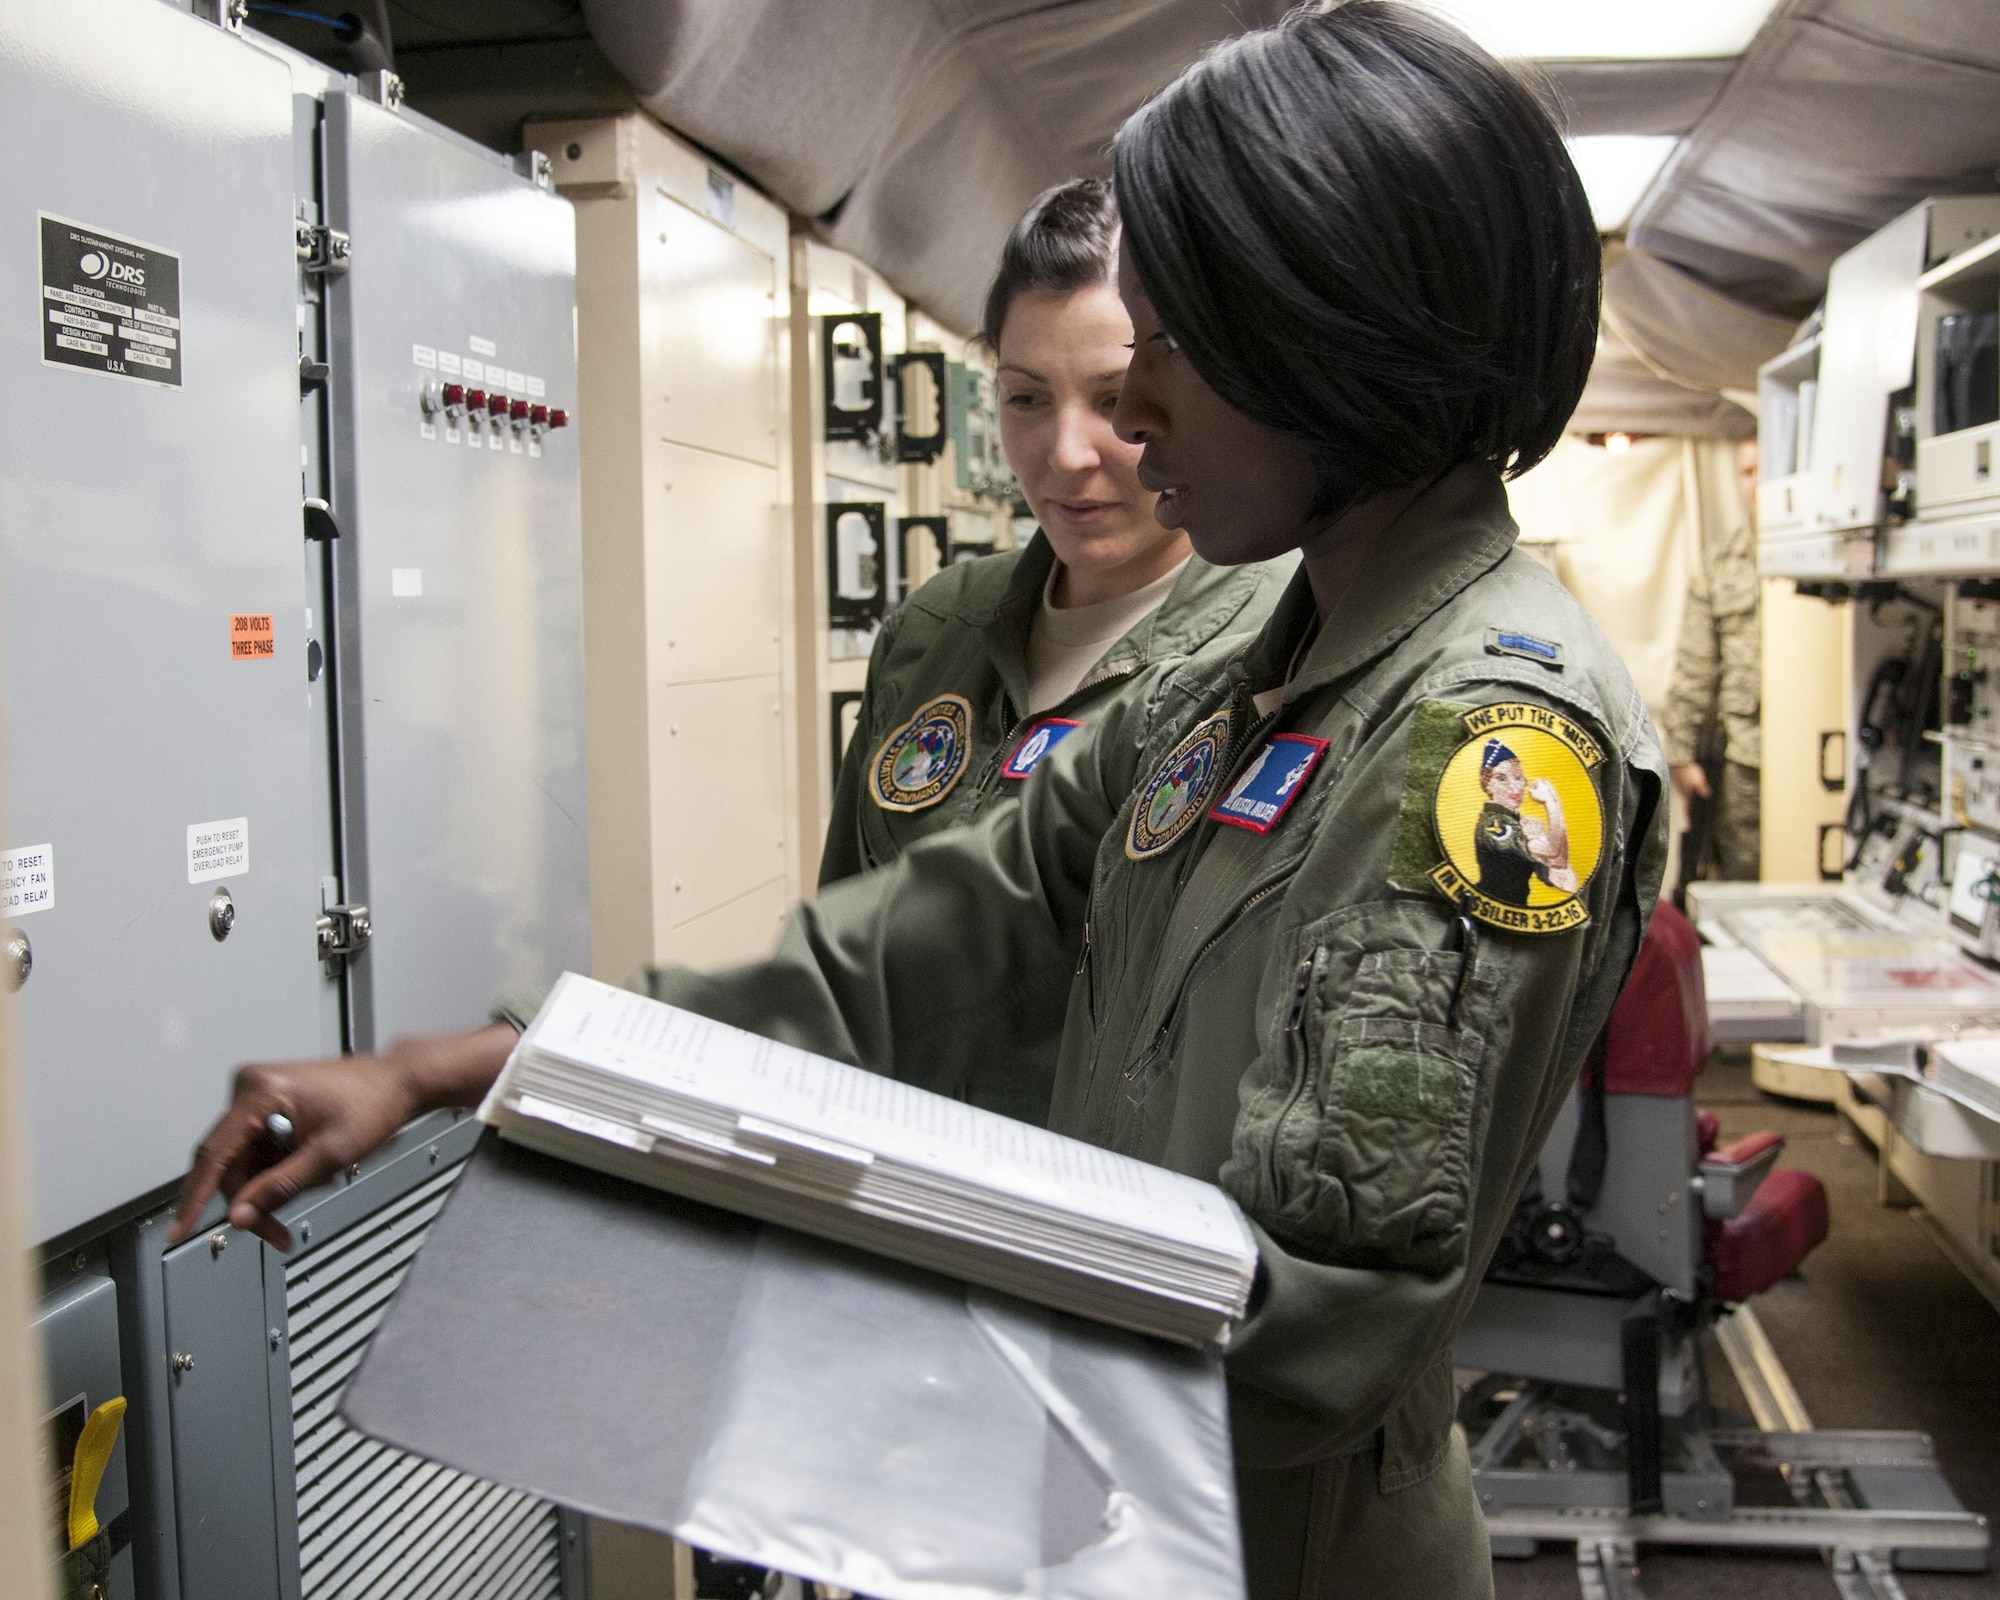 1st Lt. Krystal Wilder, 319th Missile Squadron combat crew deputy, reviews a checklist with 1st Lt. Mary Vasta, 319th MS combat crew commander, in a launch control center, March 22, 2016, in the F.E. Warren Air Force Base, Wyo., missile complex. In 1978, the first alert pulled by a female officer was conducted with the Titan II missile system. (U.S. Air Force photo by Airmen 1st Class Malcolm Mayfield)